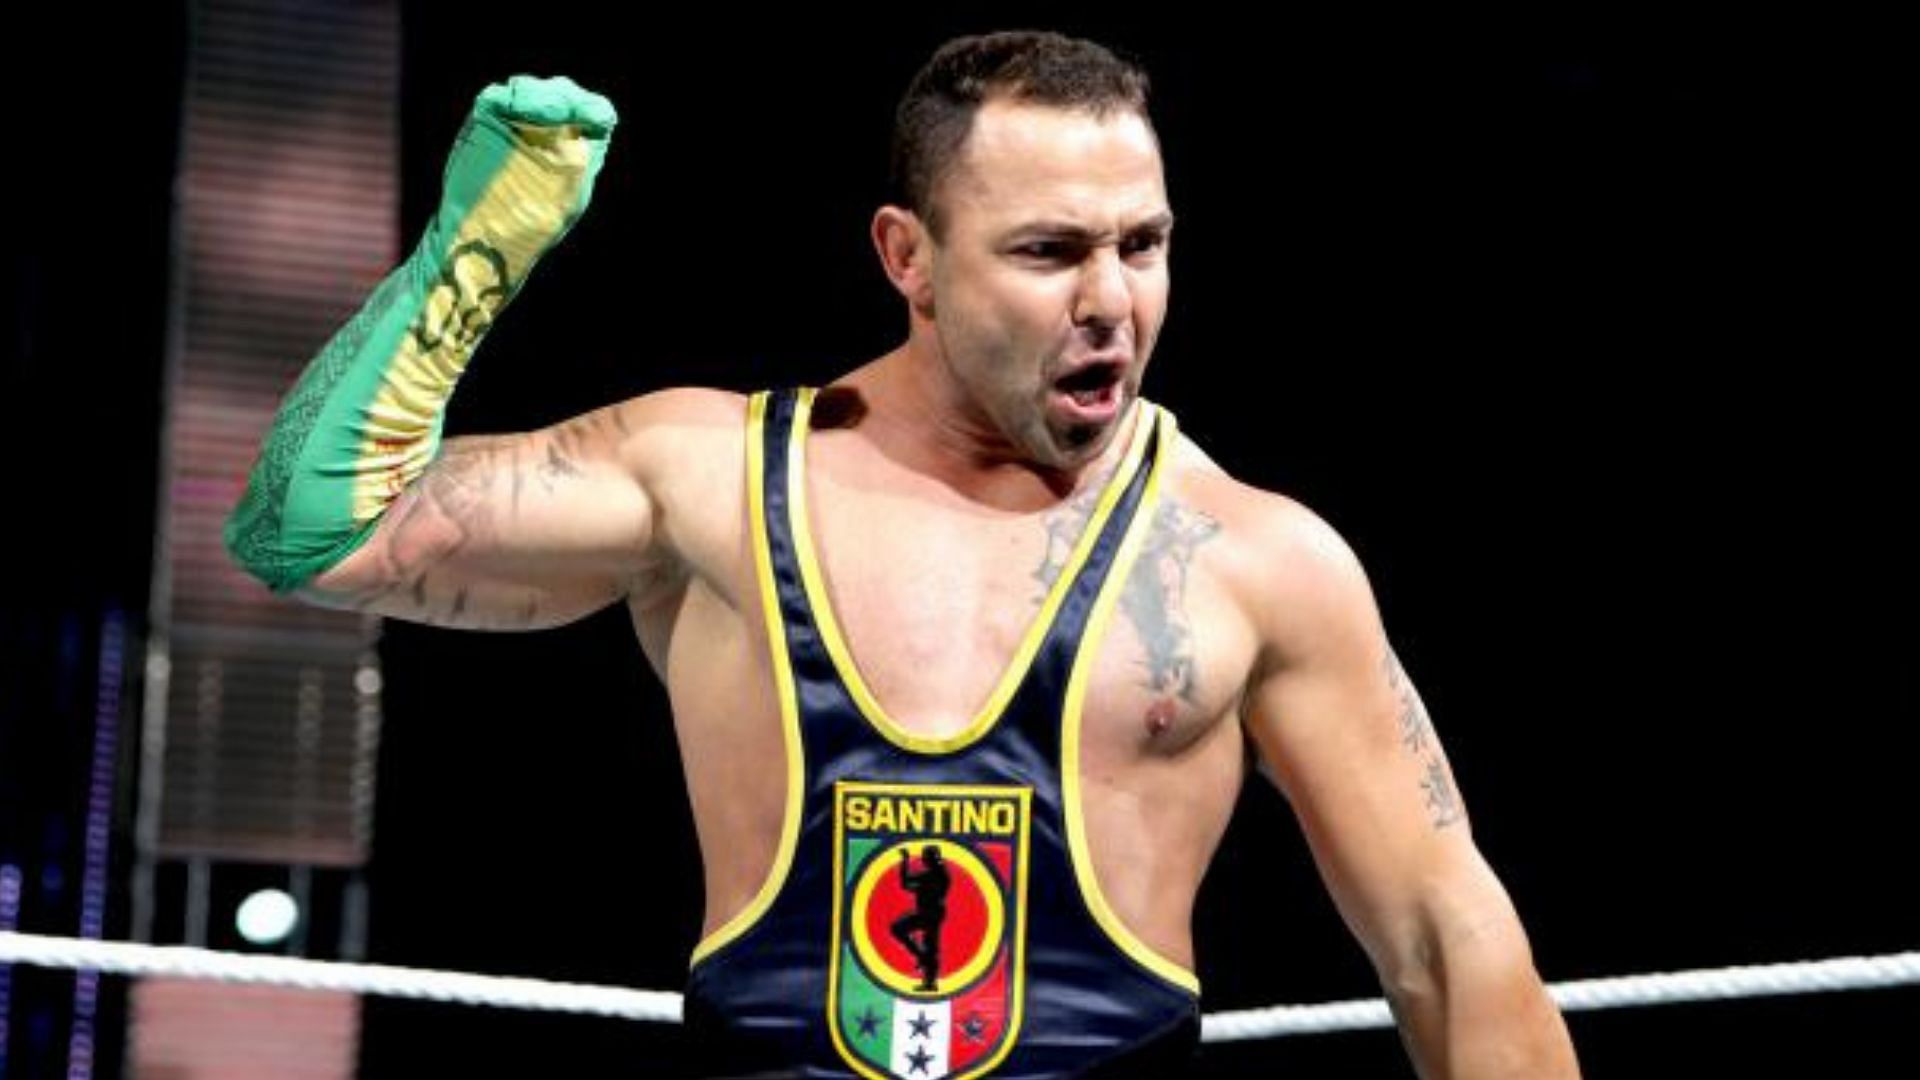 Santino Marella worked for WWE between 2005 and 2016